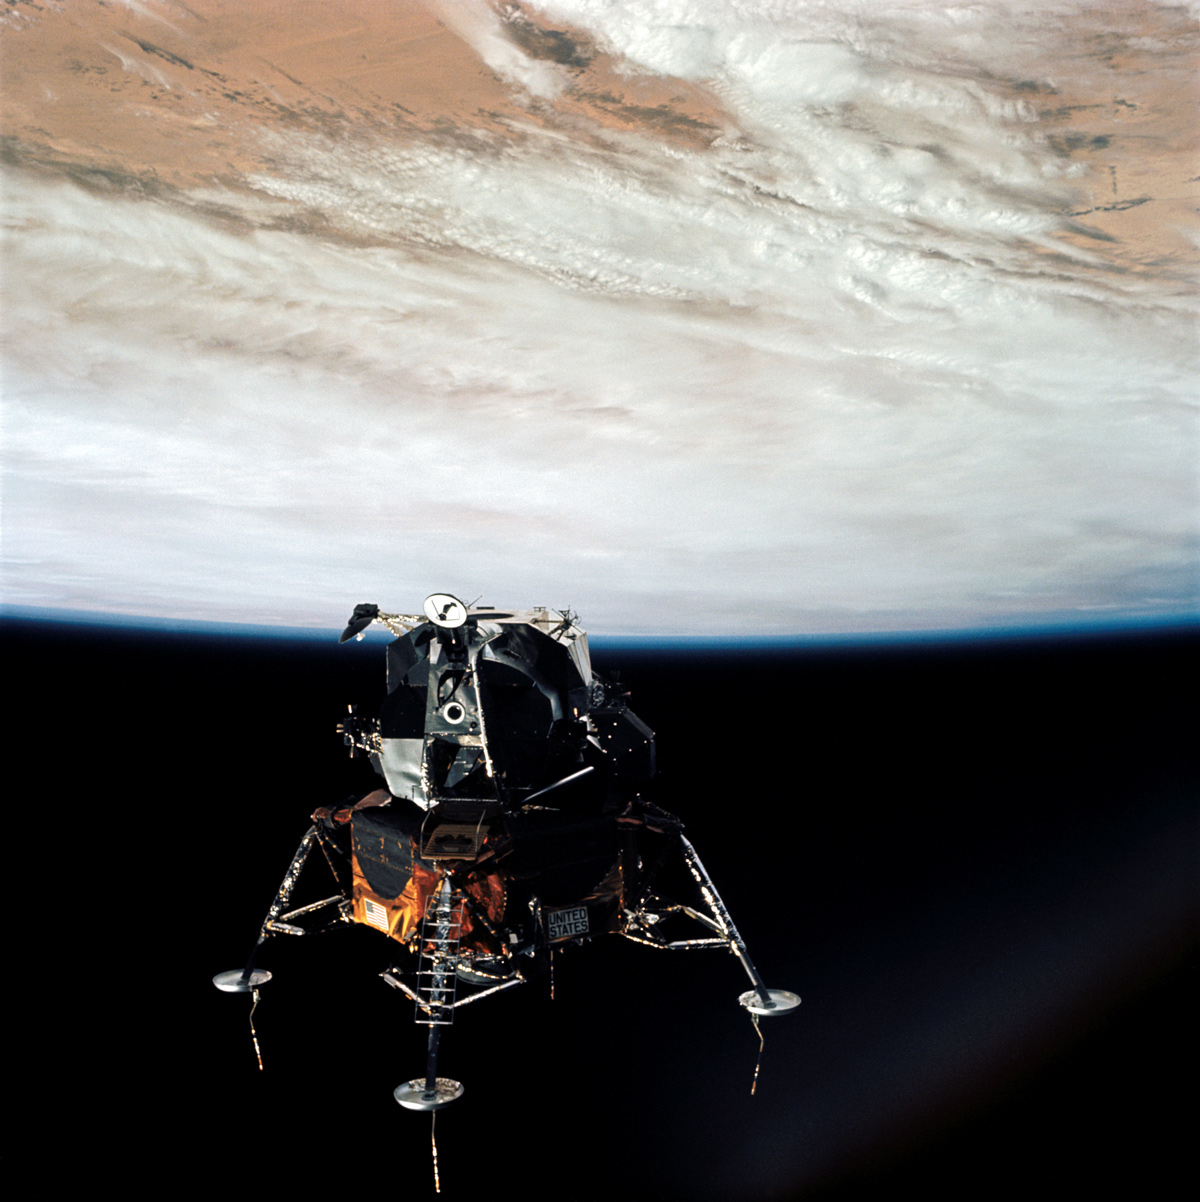 Apollo 9 Lunar Module in space with Earth, partly cloudy, in the background.